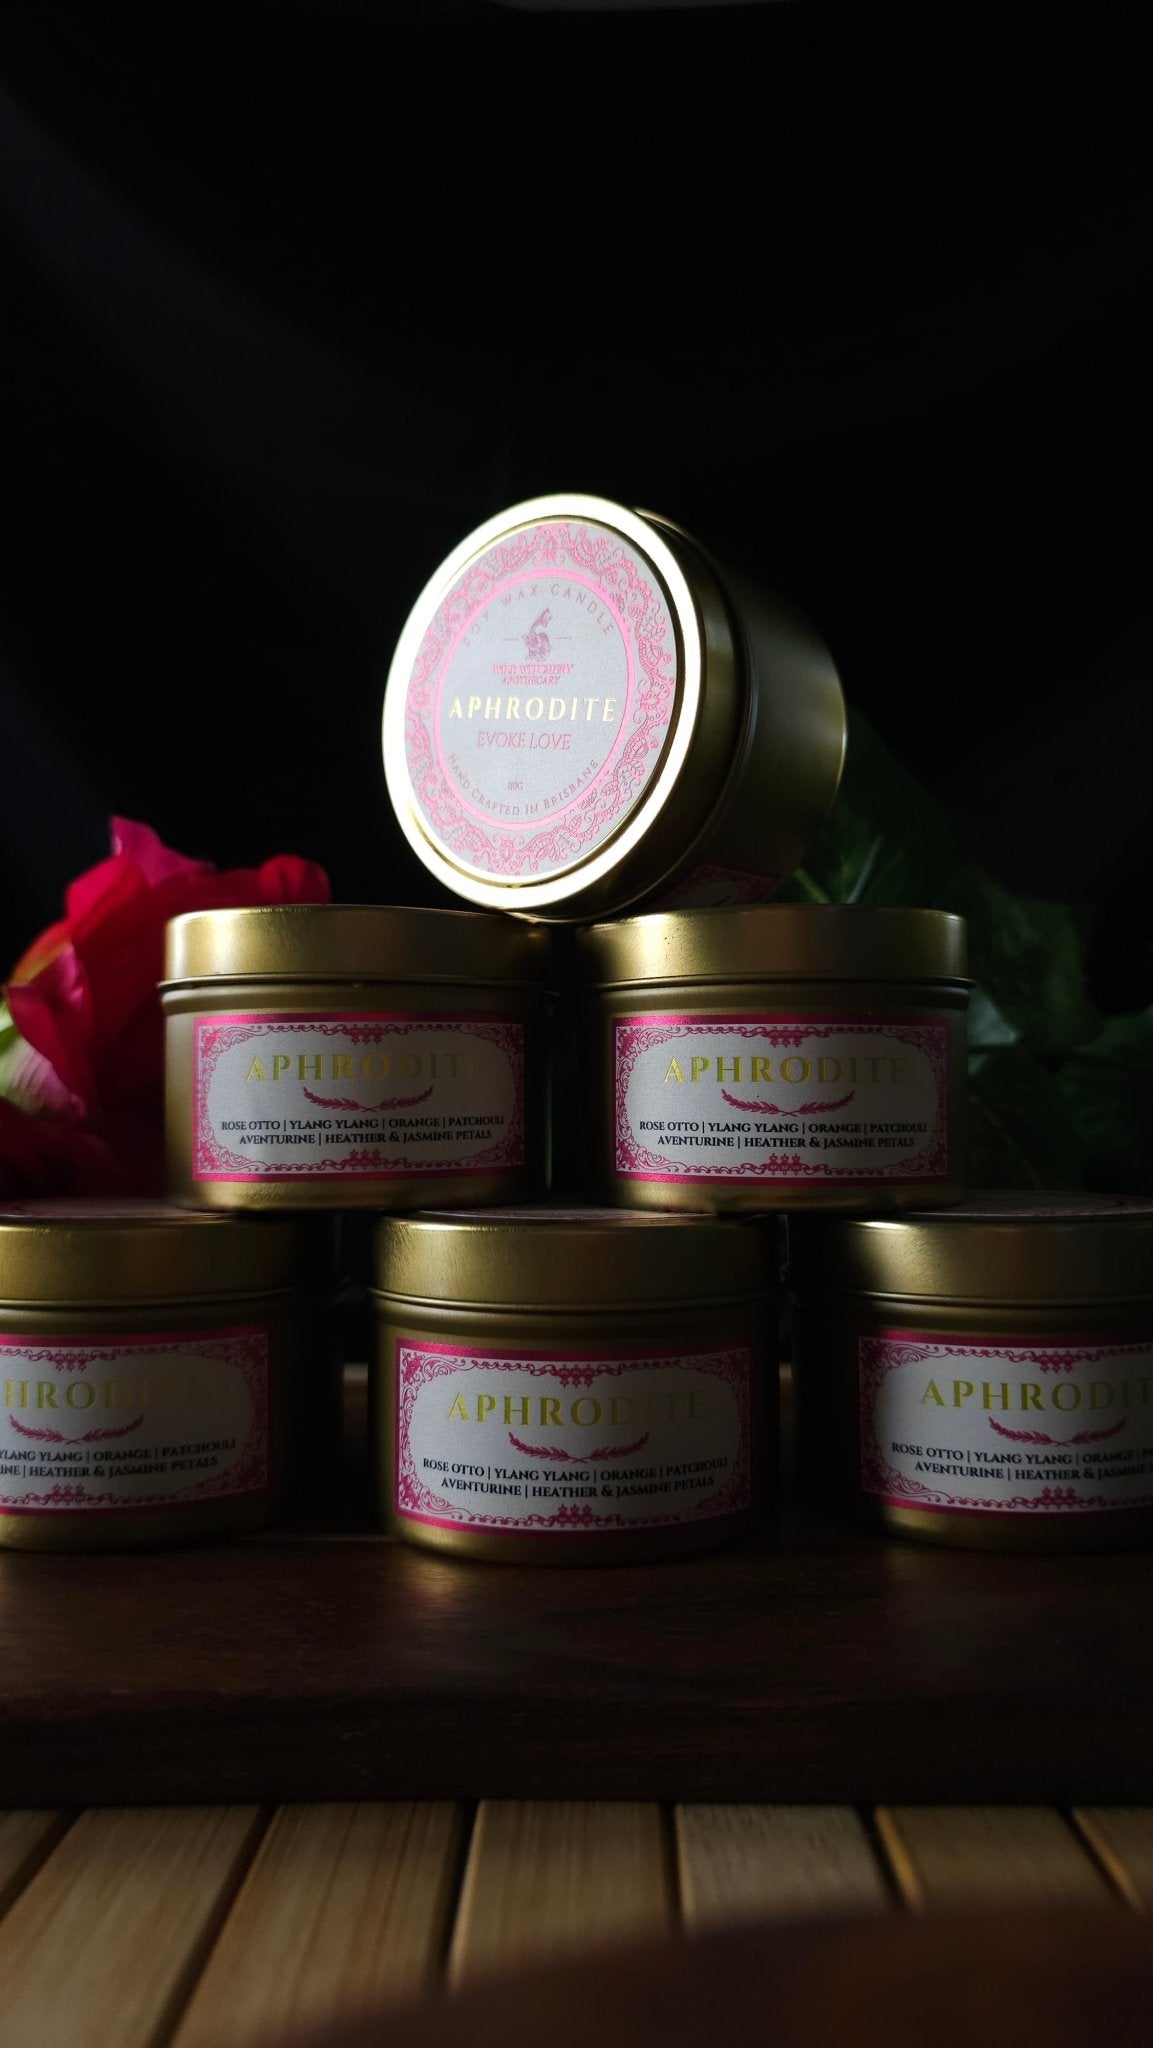 Limited Edition Aphrodite Candle - Wild Witchery Apothecary